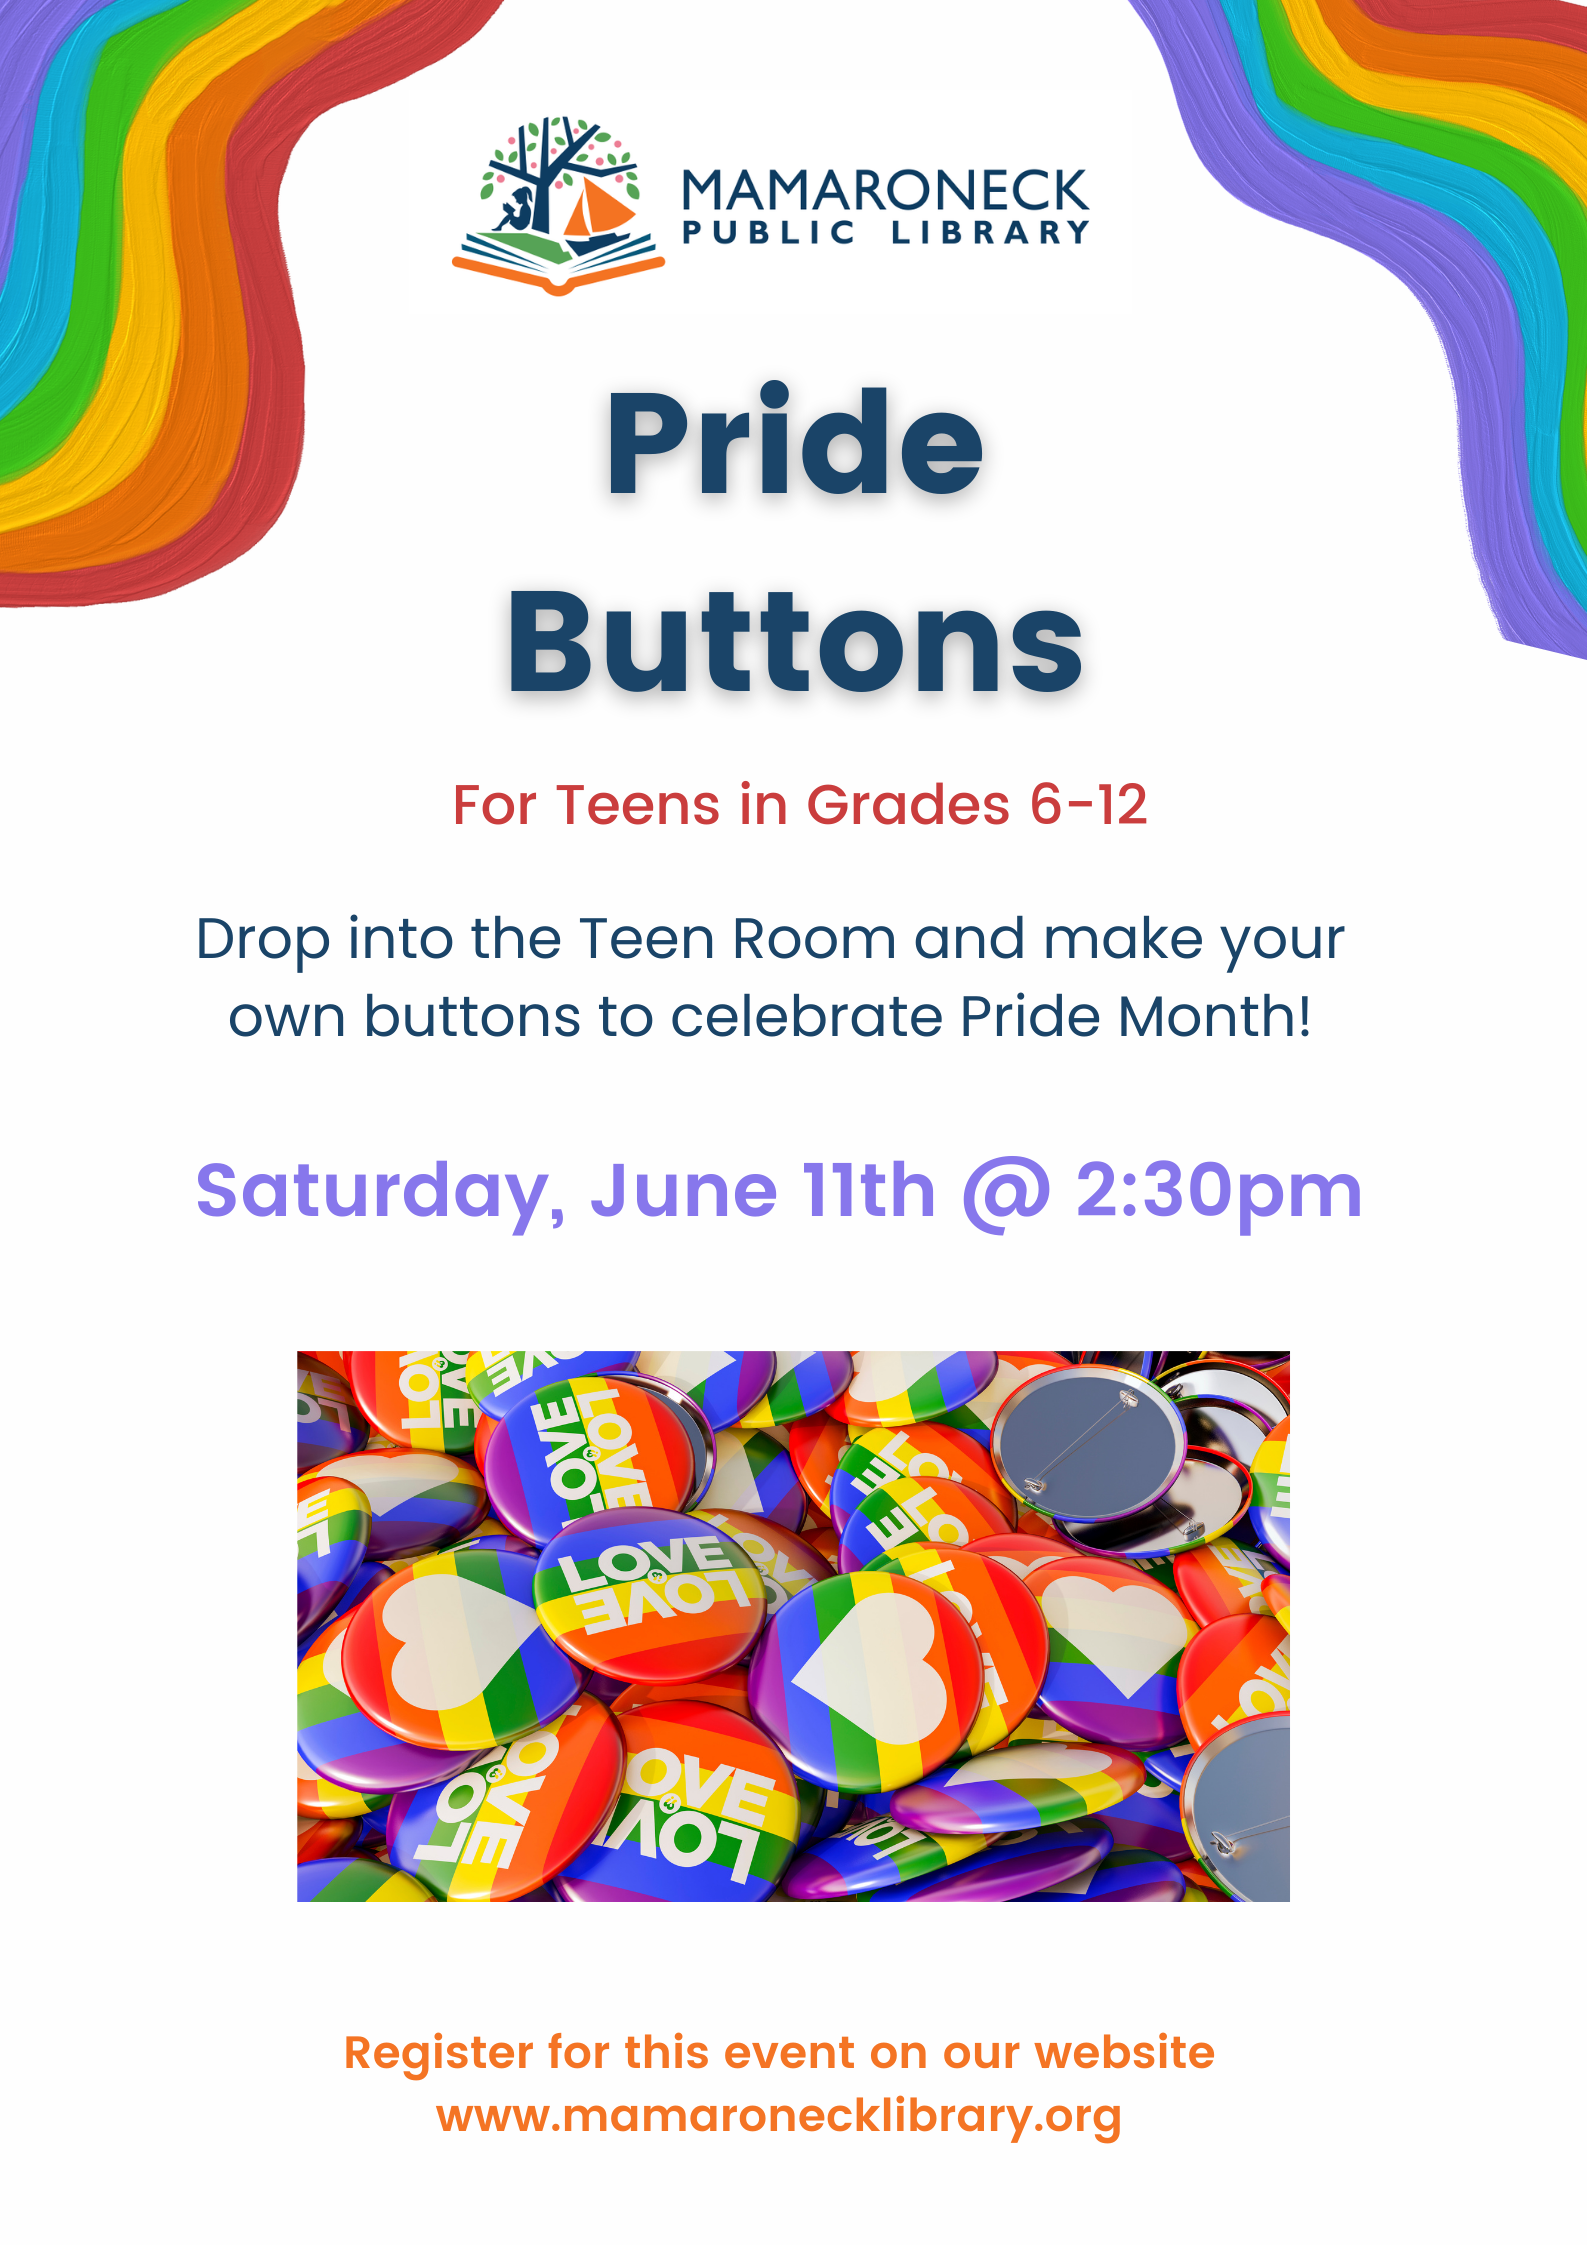 Saturday June 11th Teens making Pride buttons